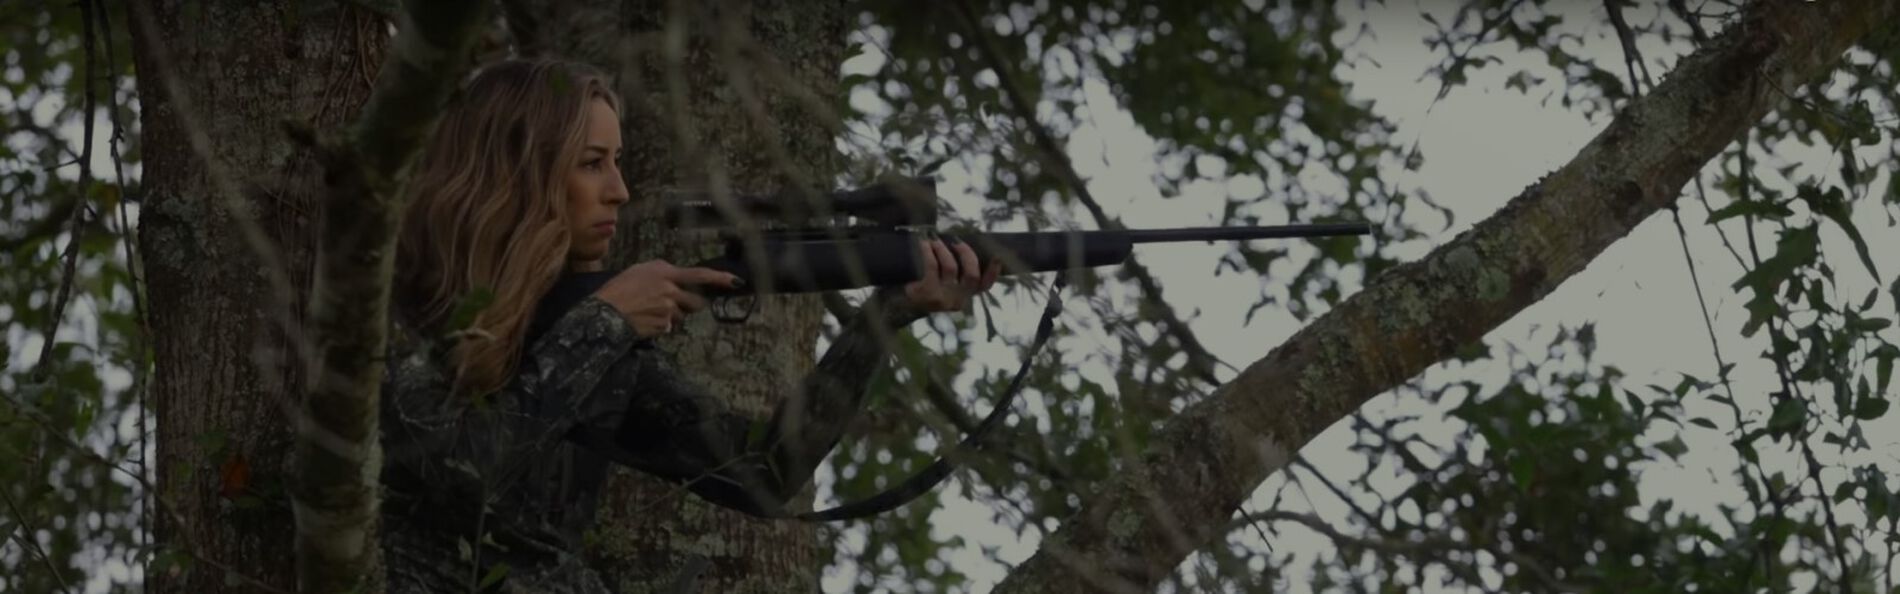 Aly looking down a rifle while in a tree stand